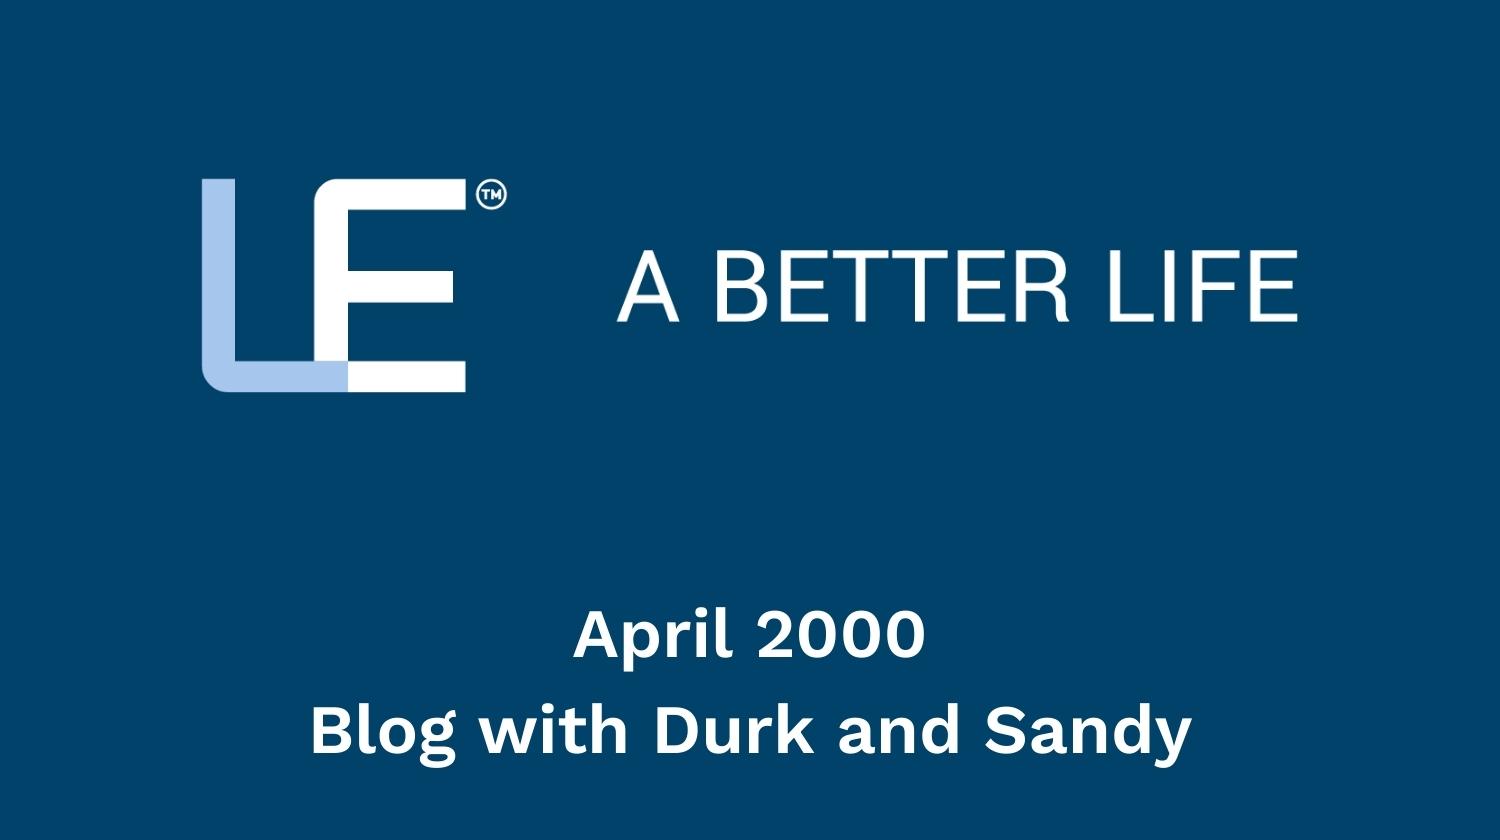 April 2000 Blog with Durk and Sandy